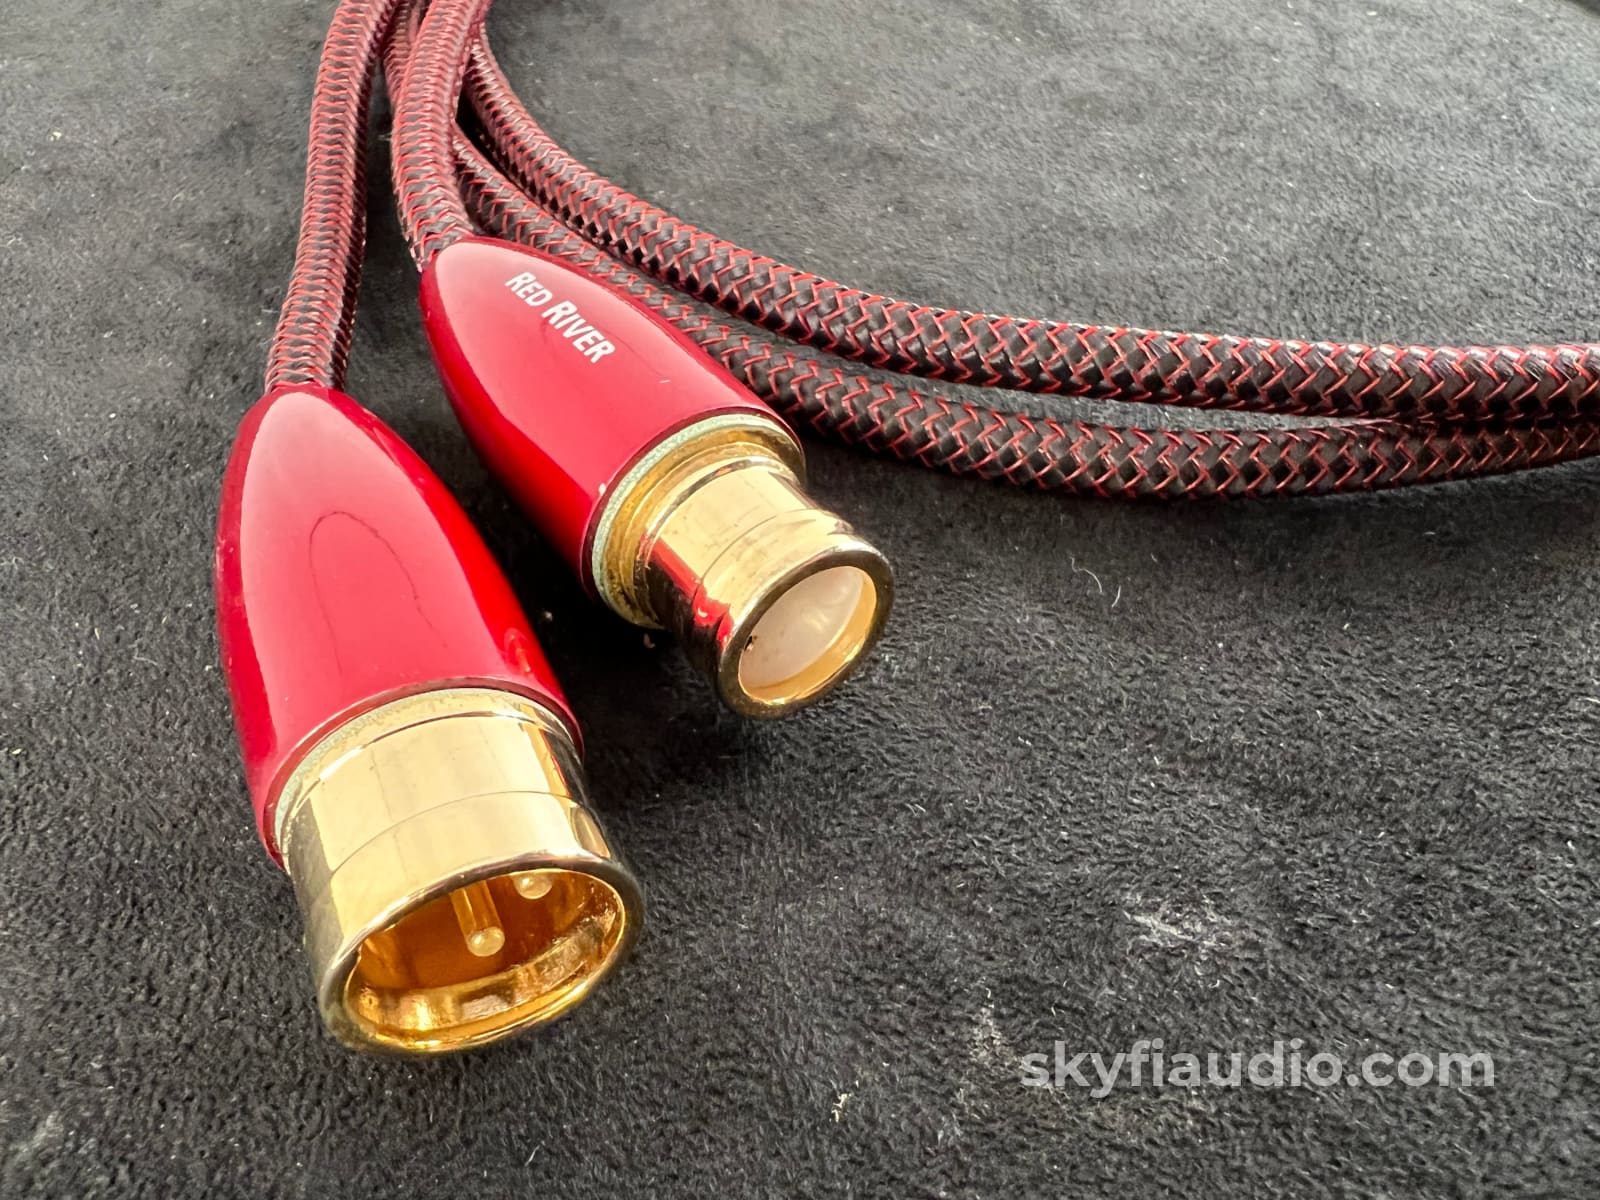 Audioquest Red River Xlr Interconnects (Pair) - 1.5M Cables